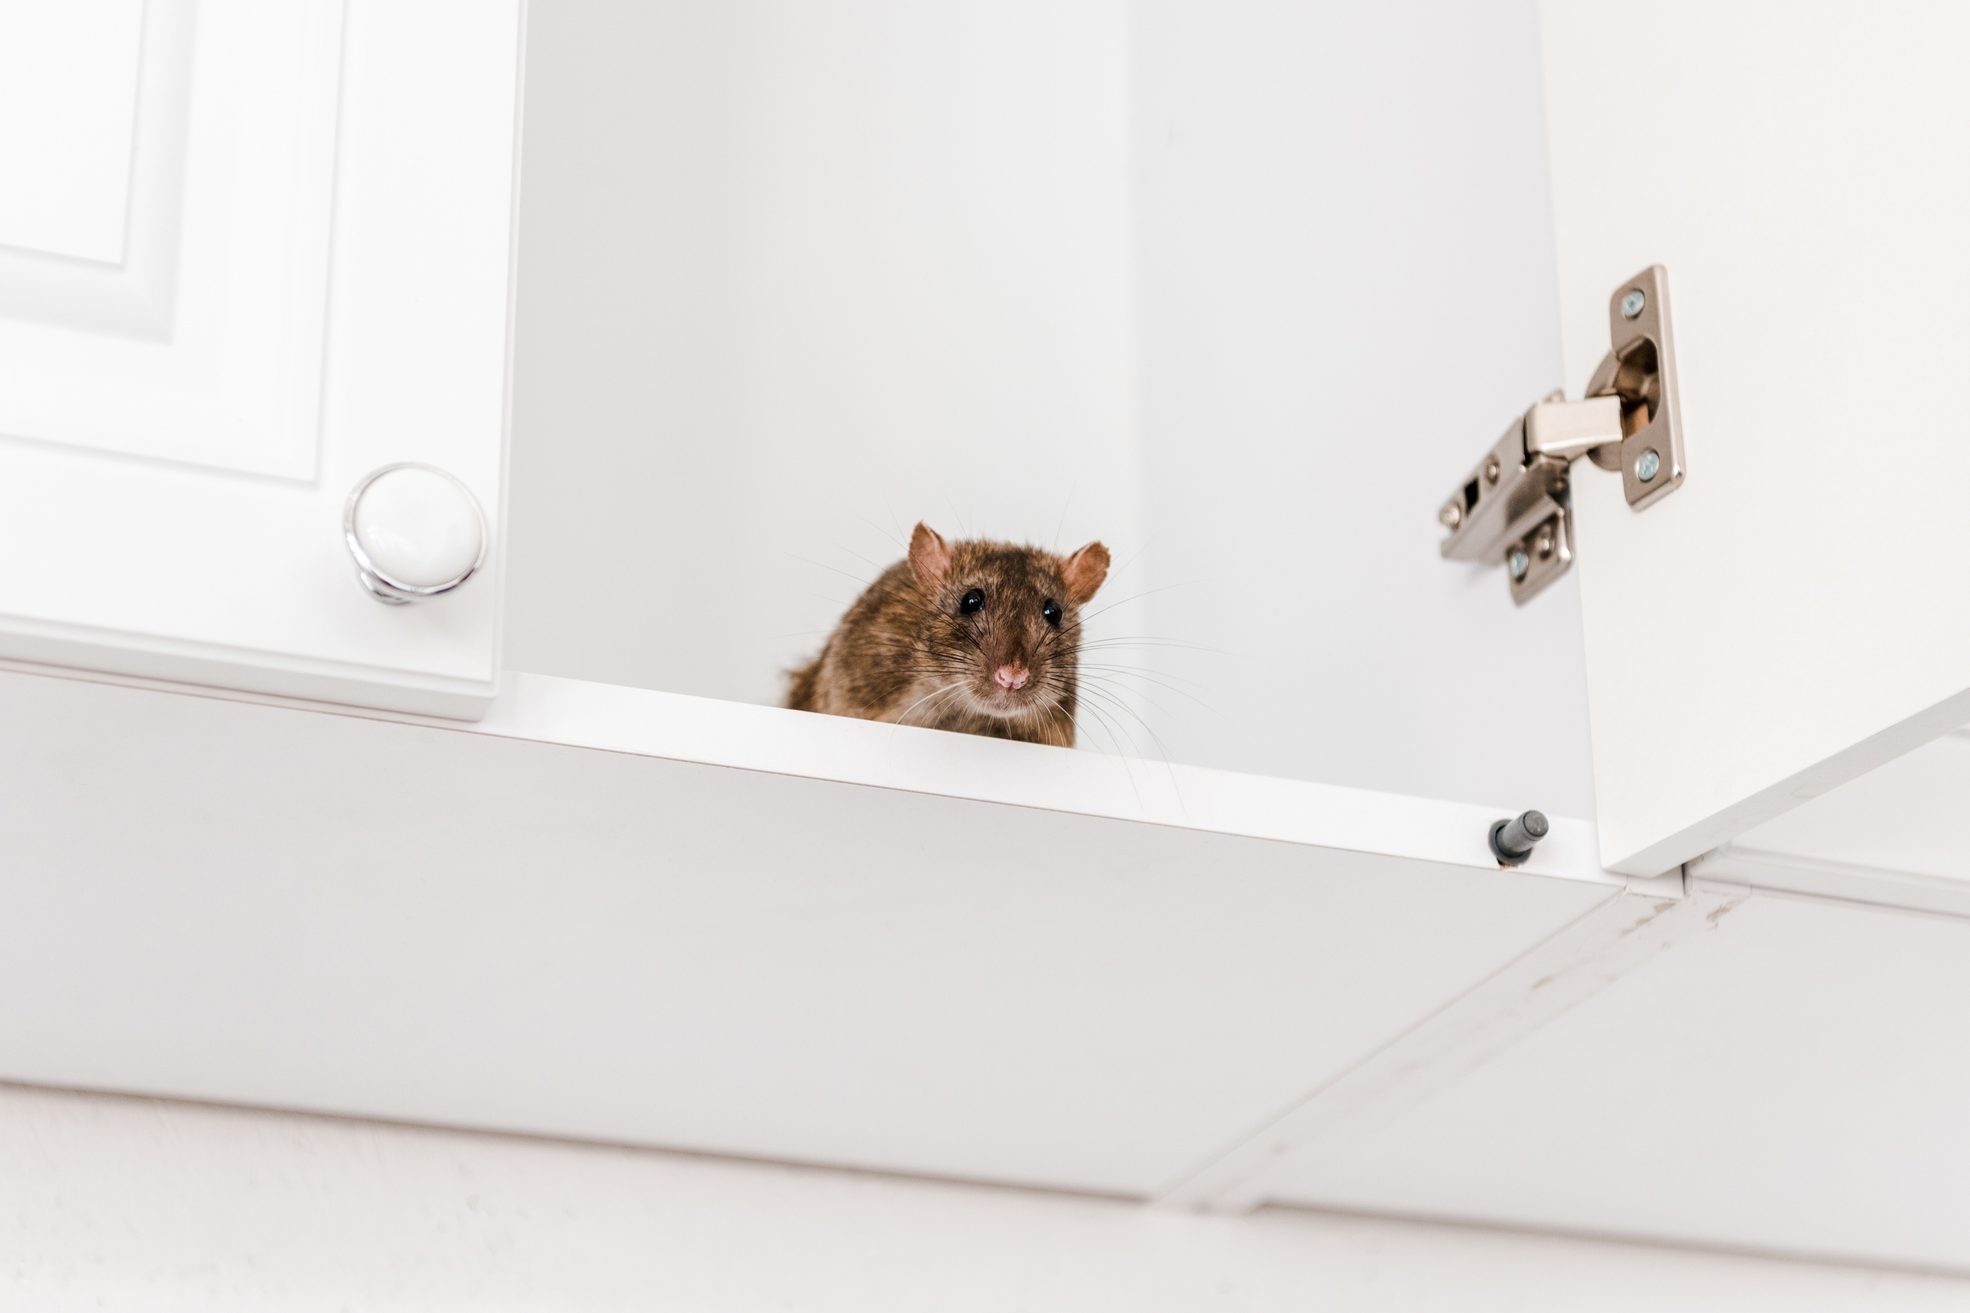 How To Get Rid of Mice Safely and Effectively